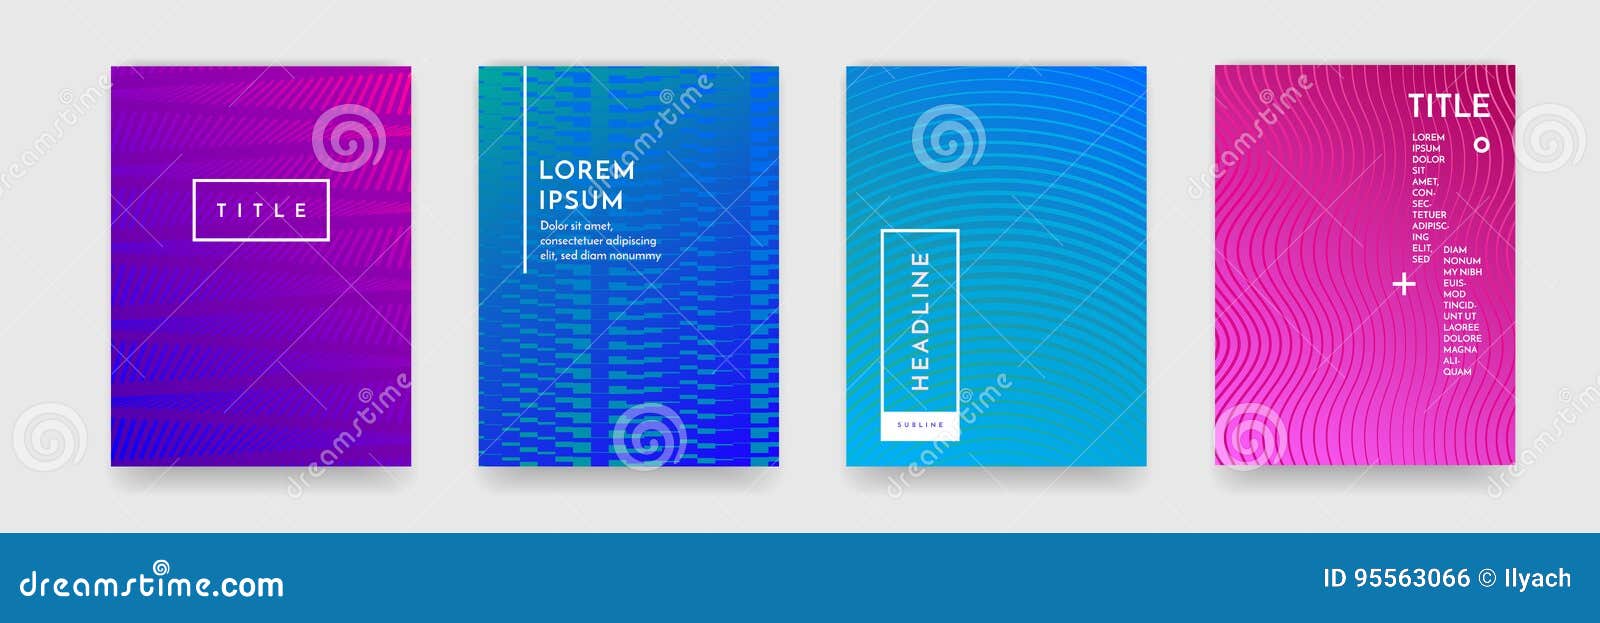 color gradient abstract geometric pattern texture for book cover template  set